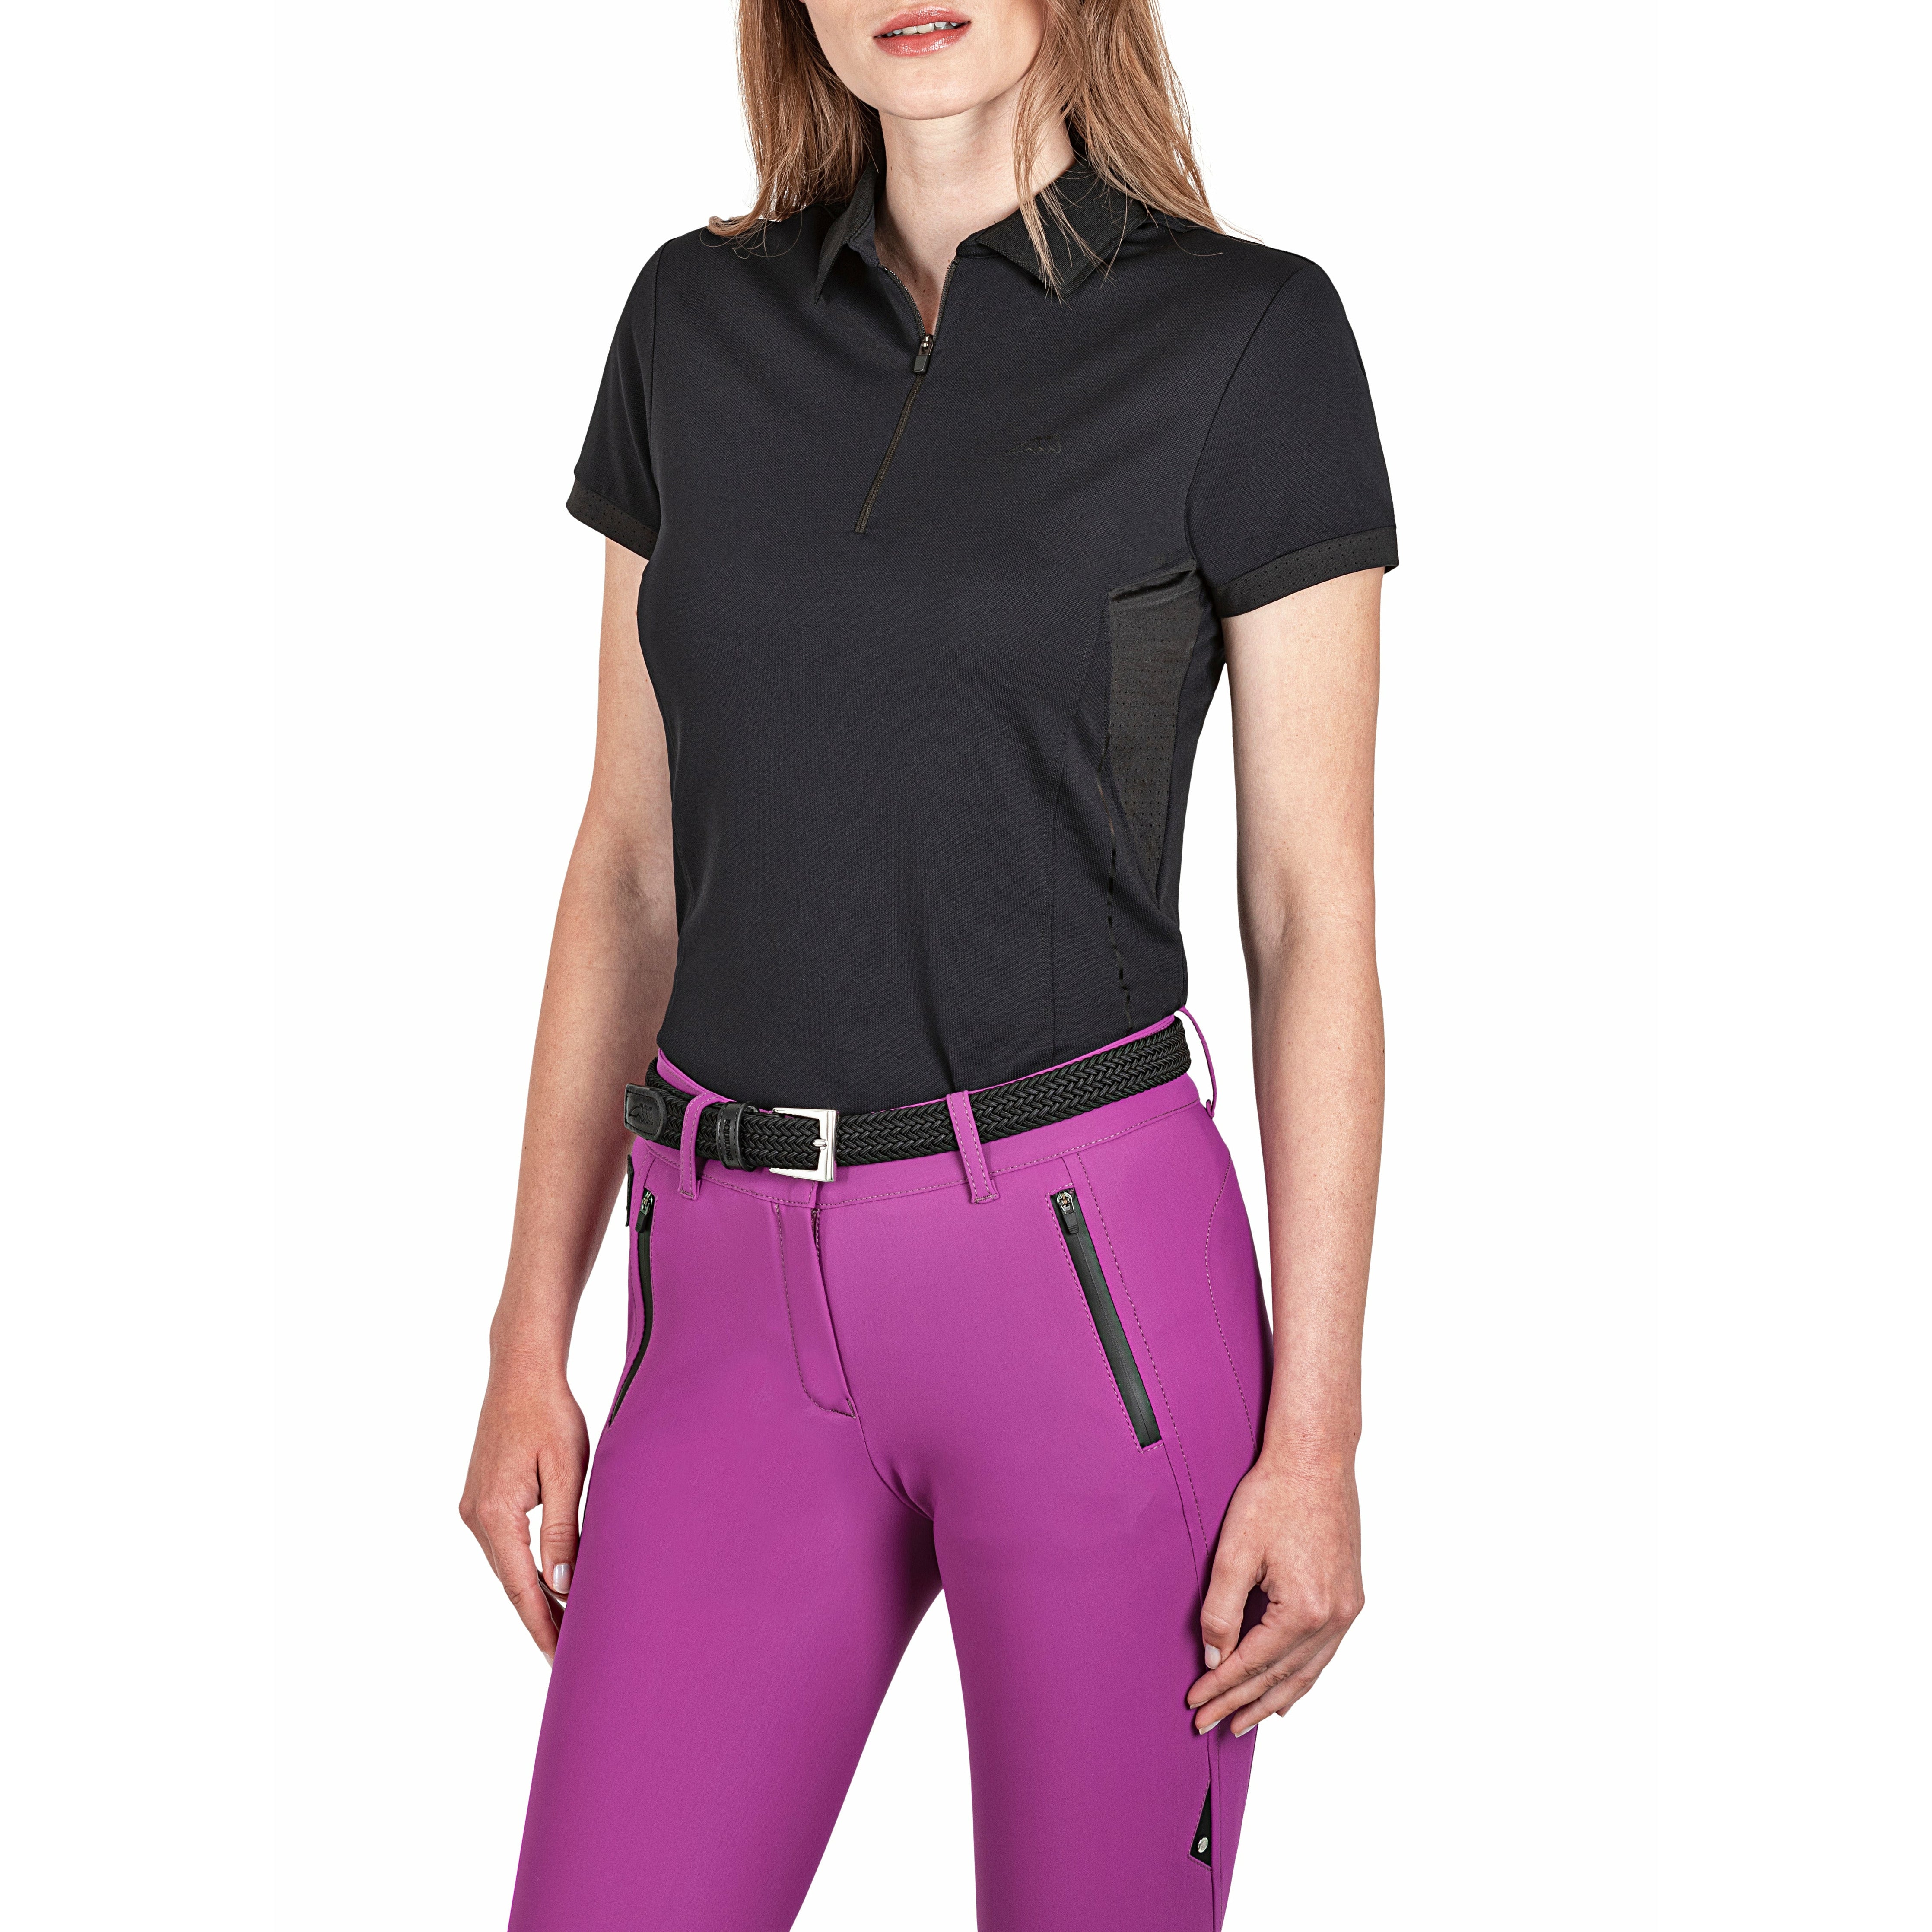 Equiline Cybelec Polo Shirt